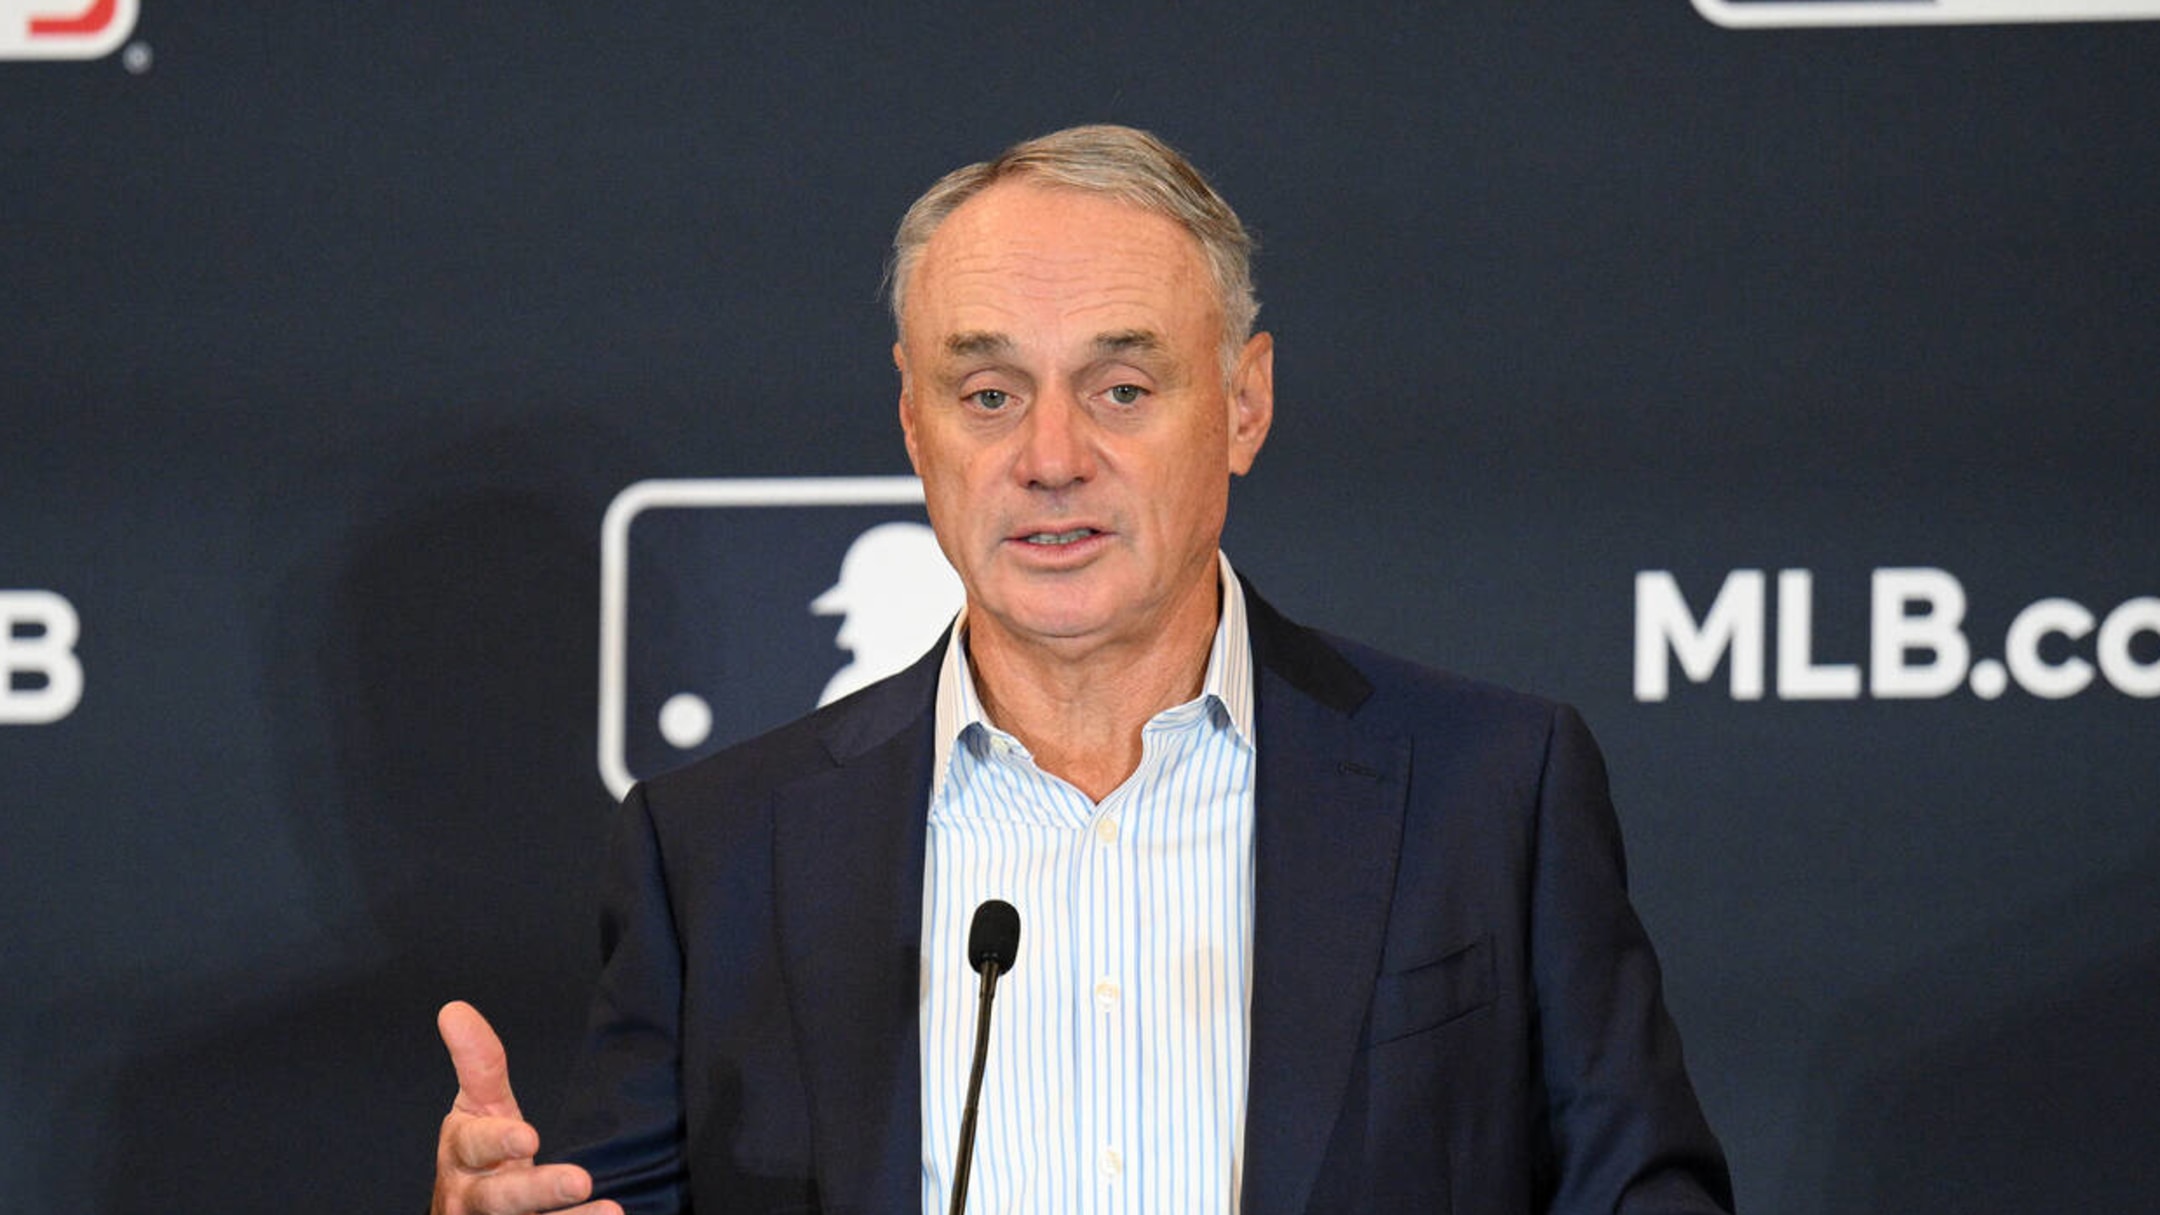 17 former MLB scouts suing league for age discrimination